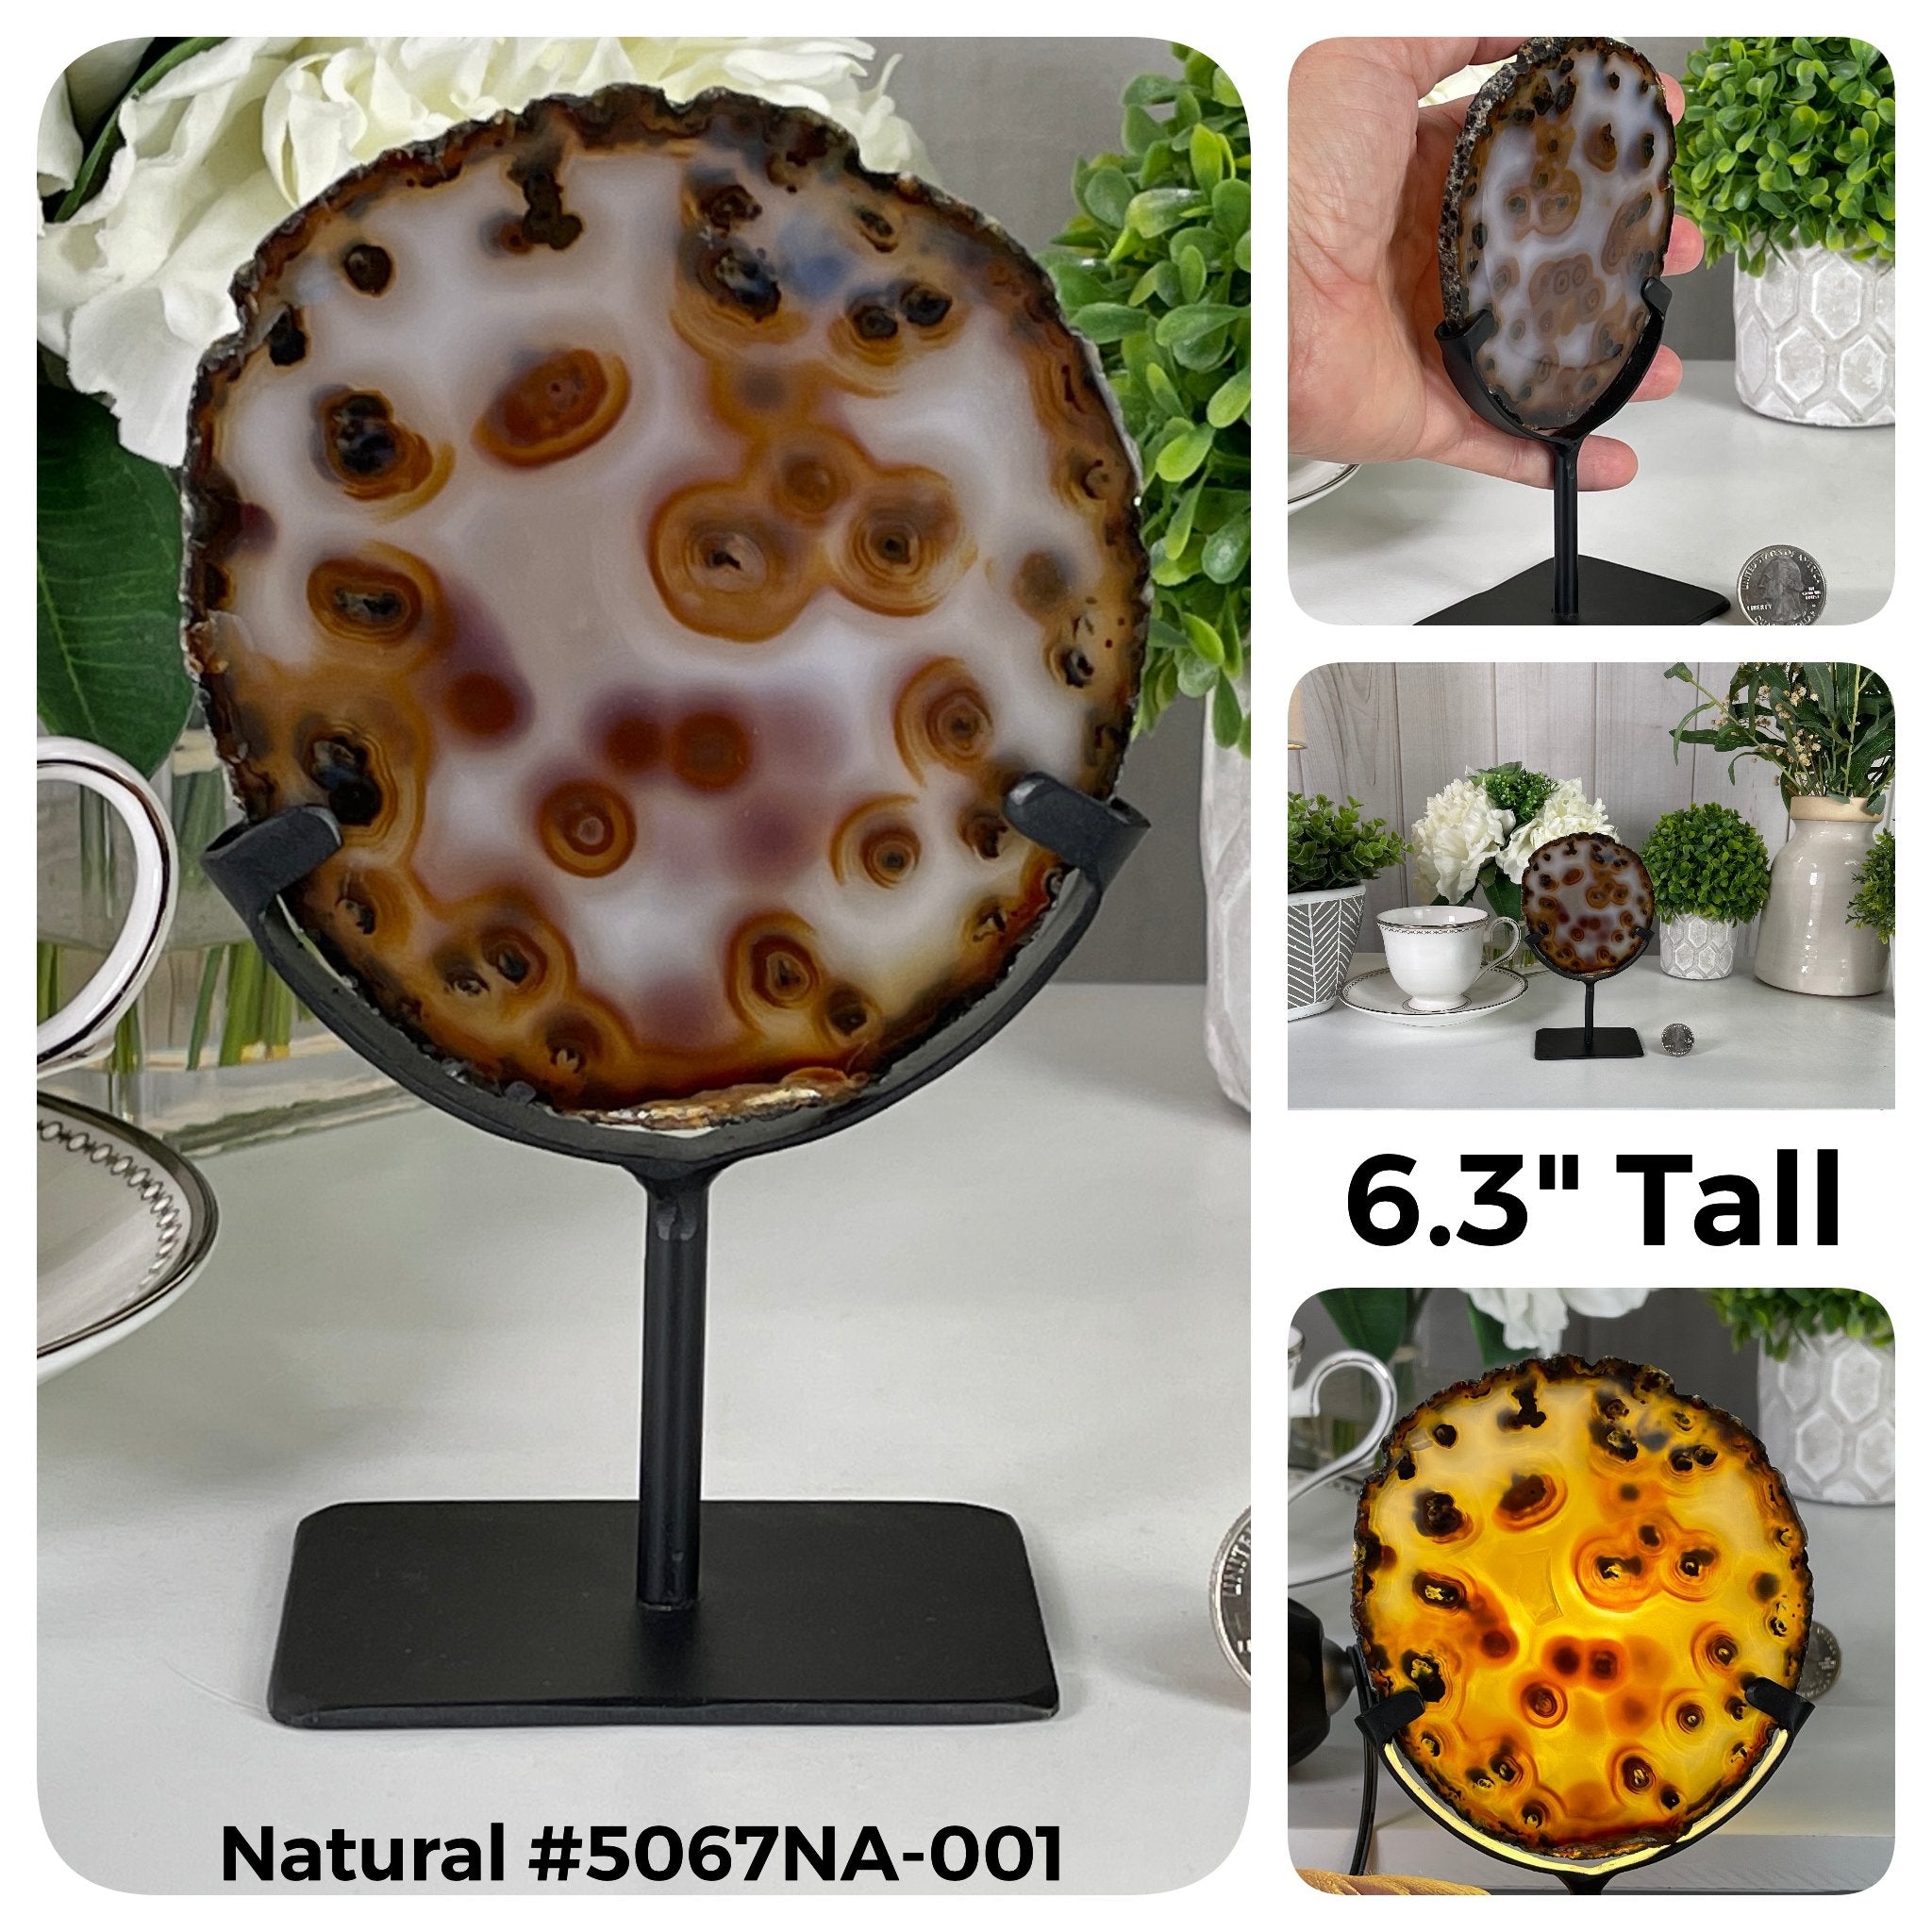 Special Smaller Natural Brazilian Agate Slices on Metal Stands Model #5067 by Brazil Gems - Brazil GemsBrazil GemsSpecial Smaller Natural Brazilian Agate Slices on Metal Stands Model #5067 by Brazil GemsSlices on Fixed Bases5067NA-001